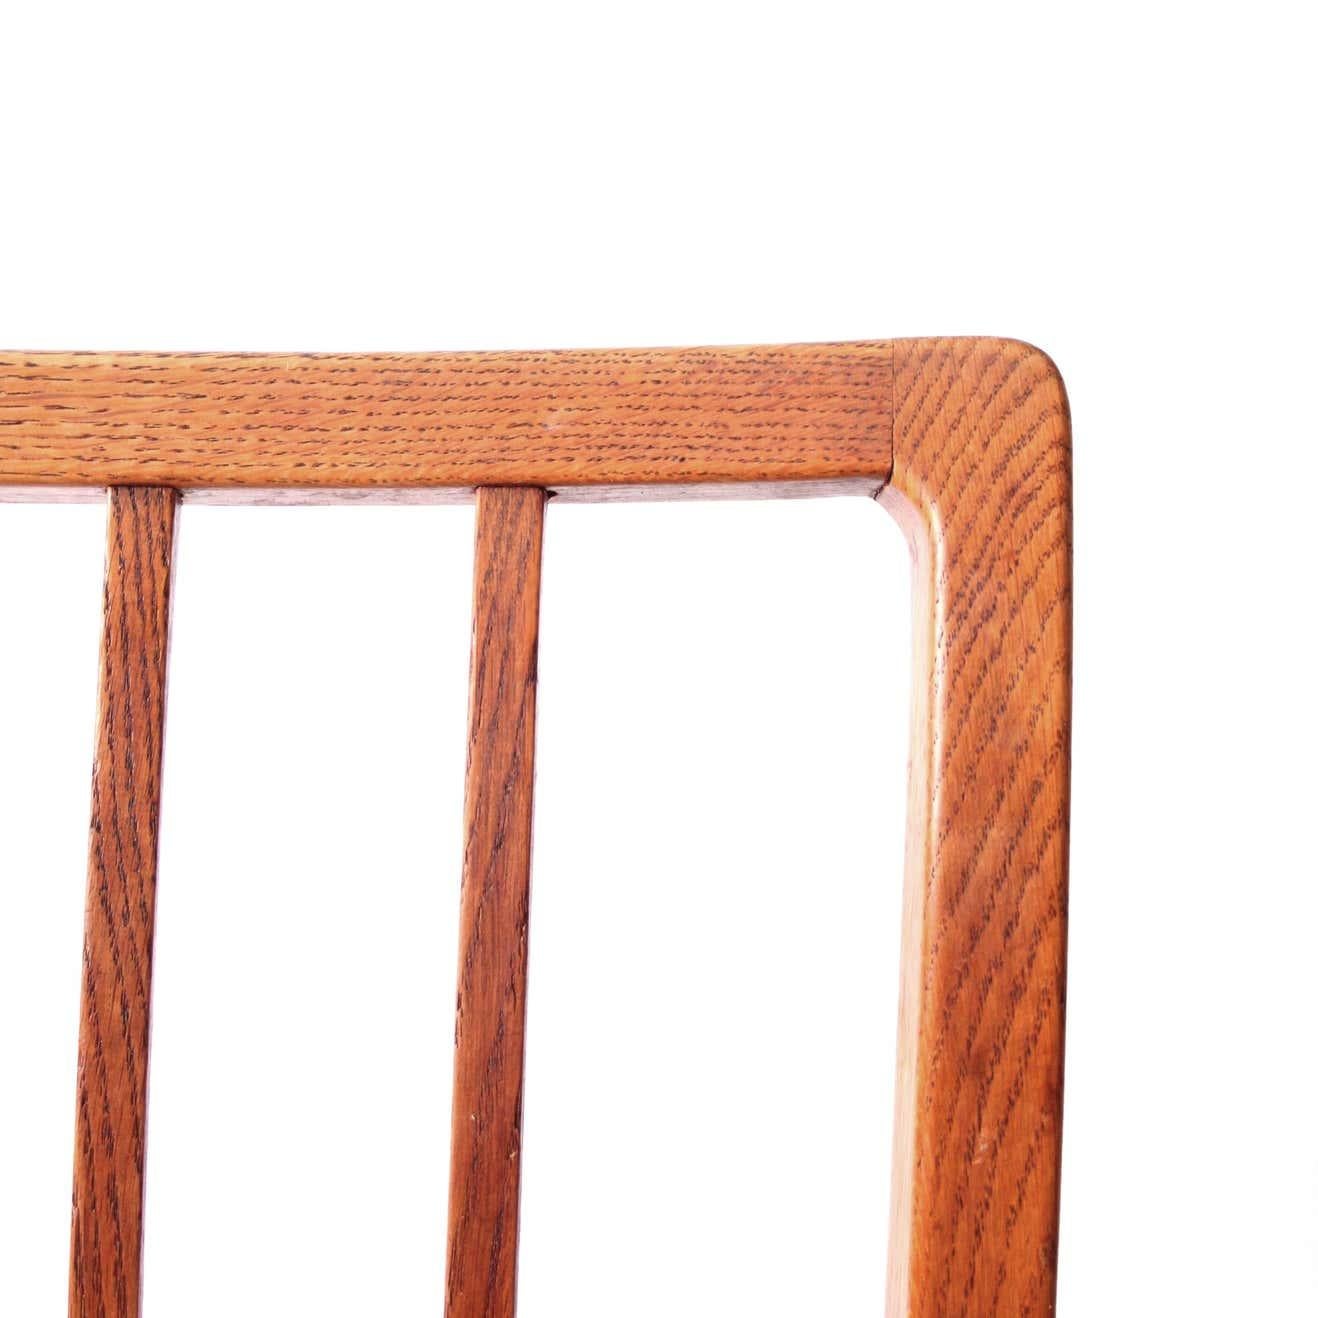 Jacob Kjaer set of 6 dining chairs Oak and original Niger leather, 1930's For Sale 3